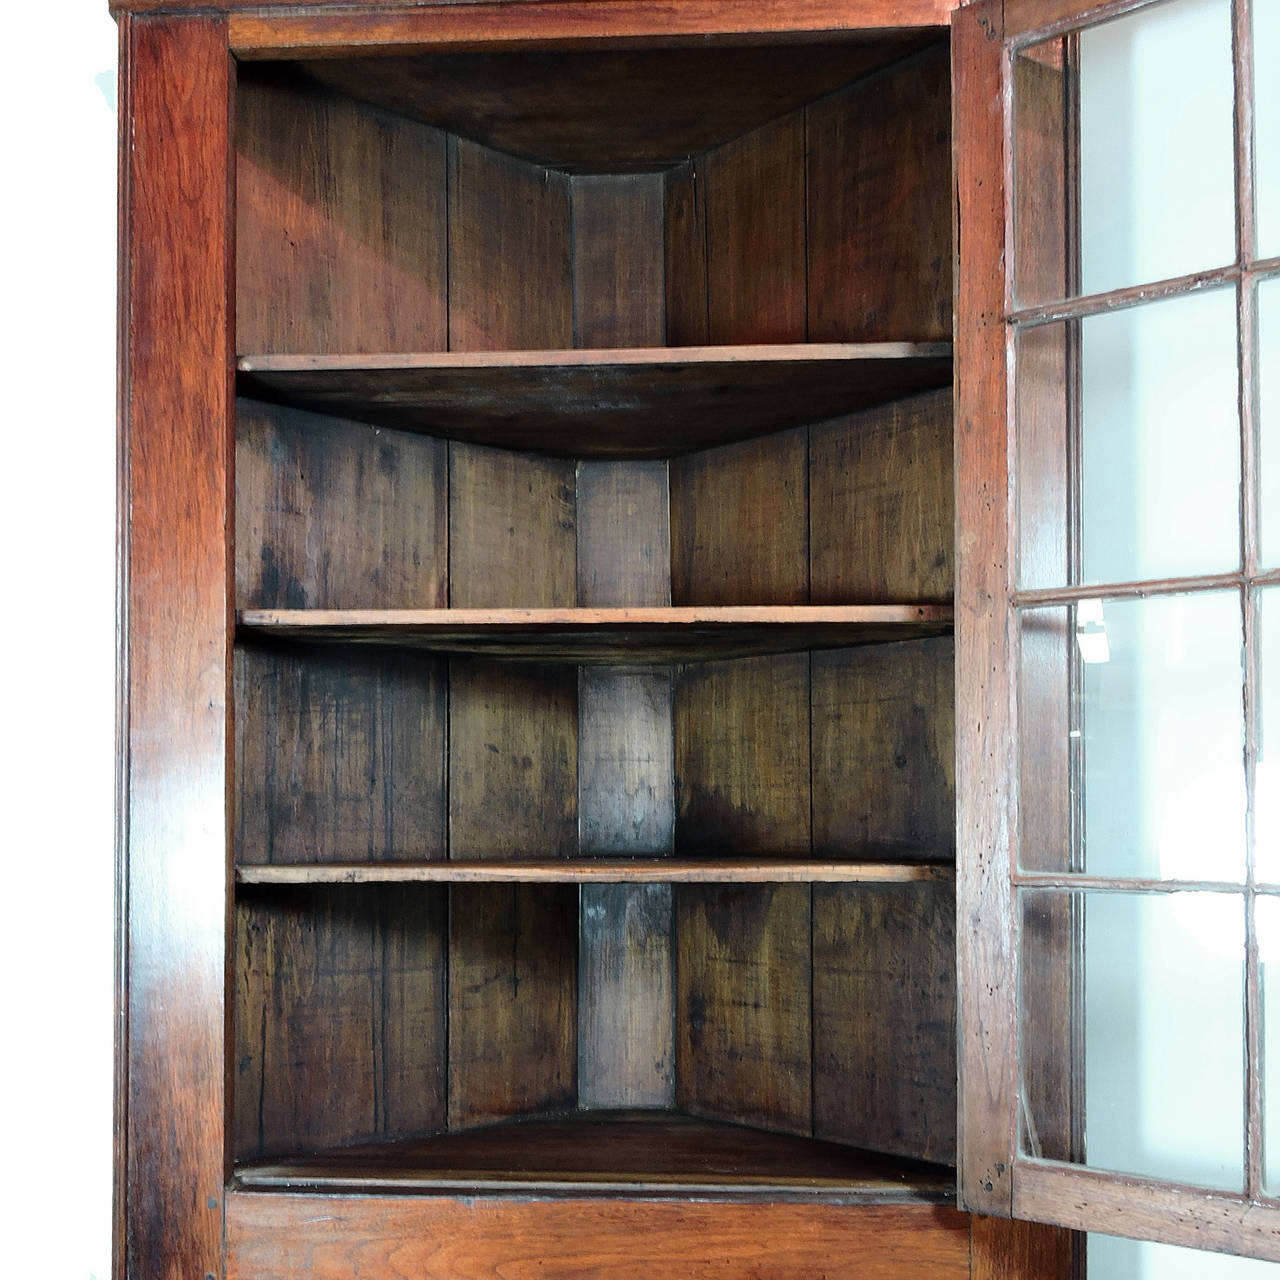 American mahogany (OAK/Walnut?) corner cupboard on bracket feet, late 18th or early 19th century. One-piece, comprised of 12 pane glass upper door with four interior shelves, over a single door cabinet concealing two additional storage shelves.